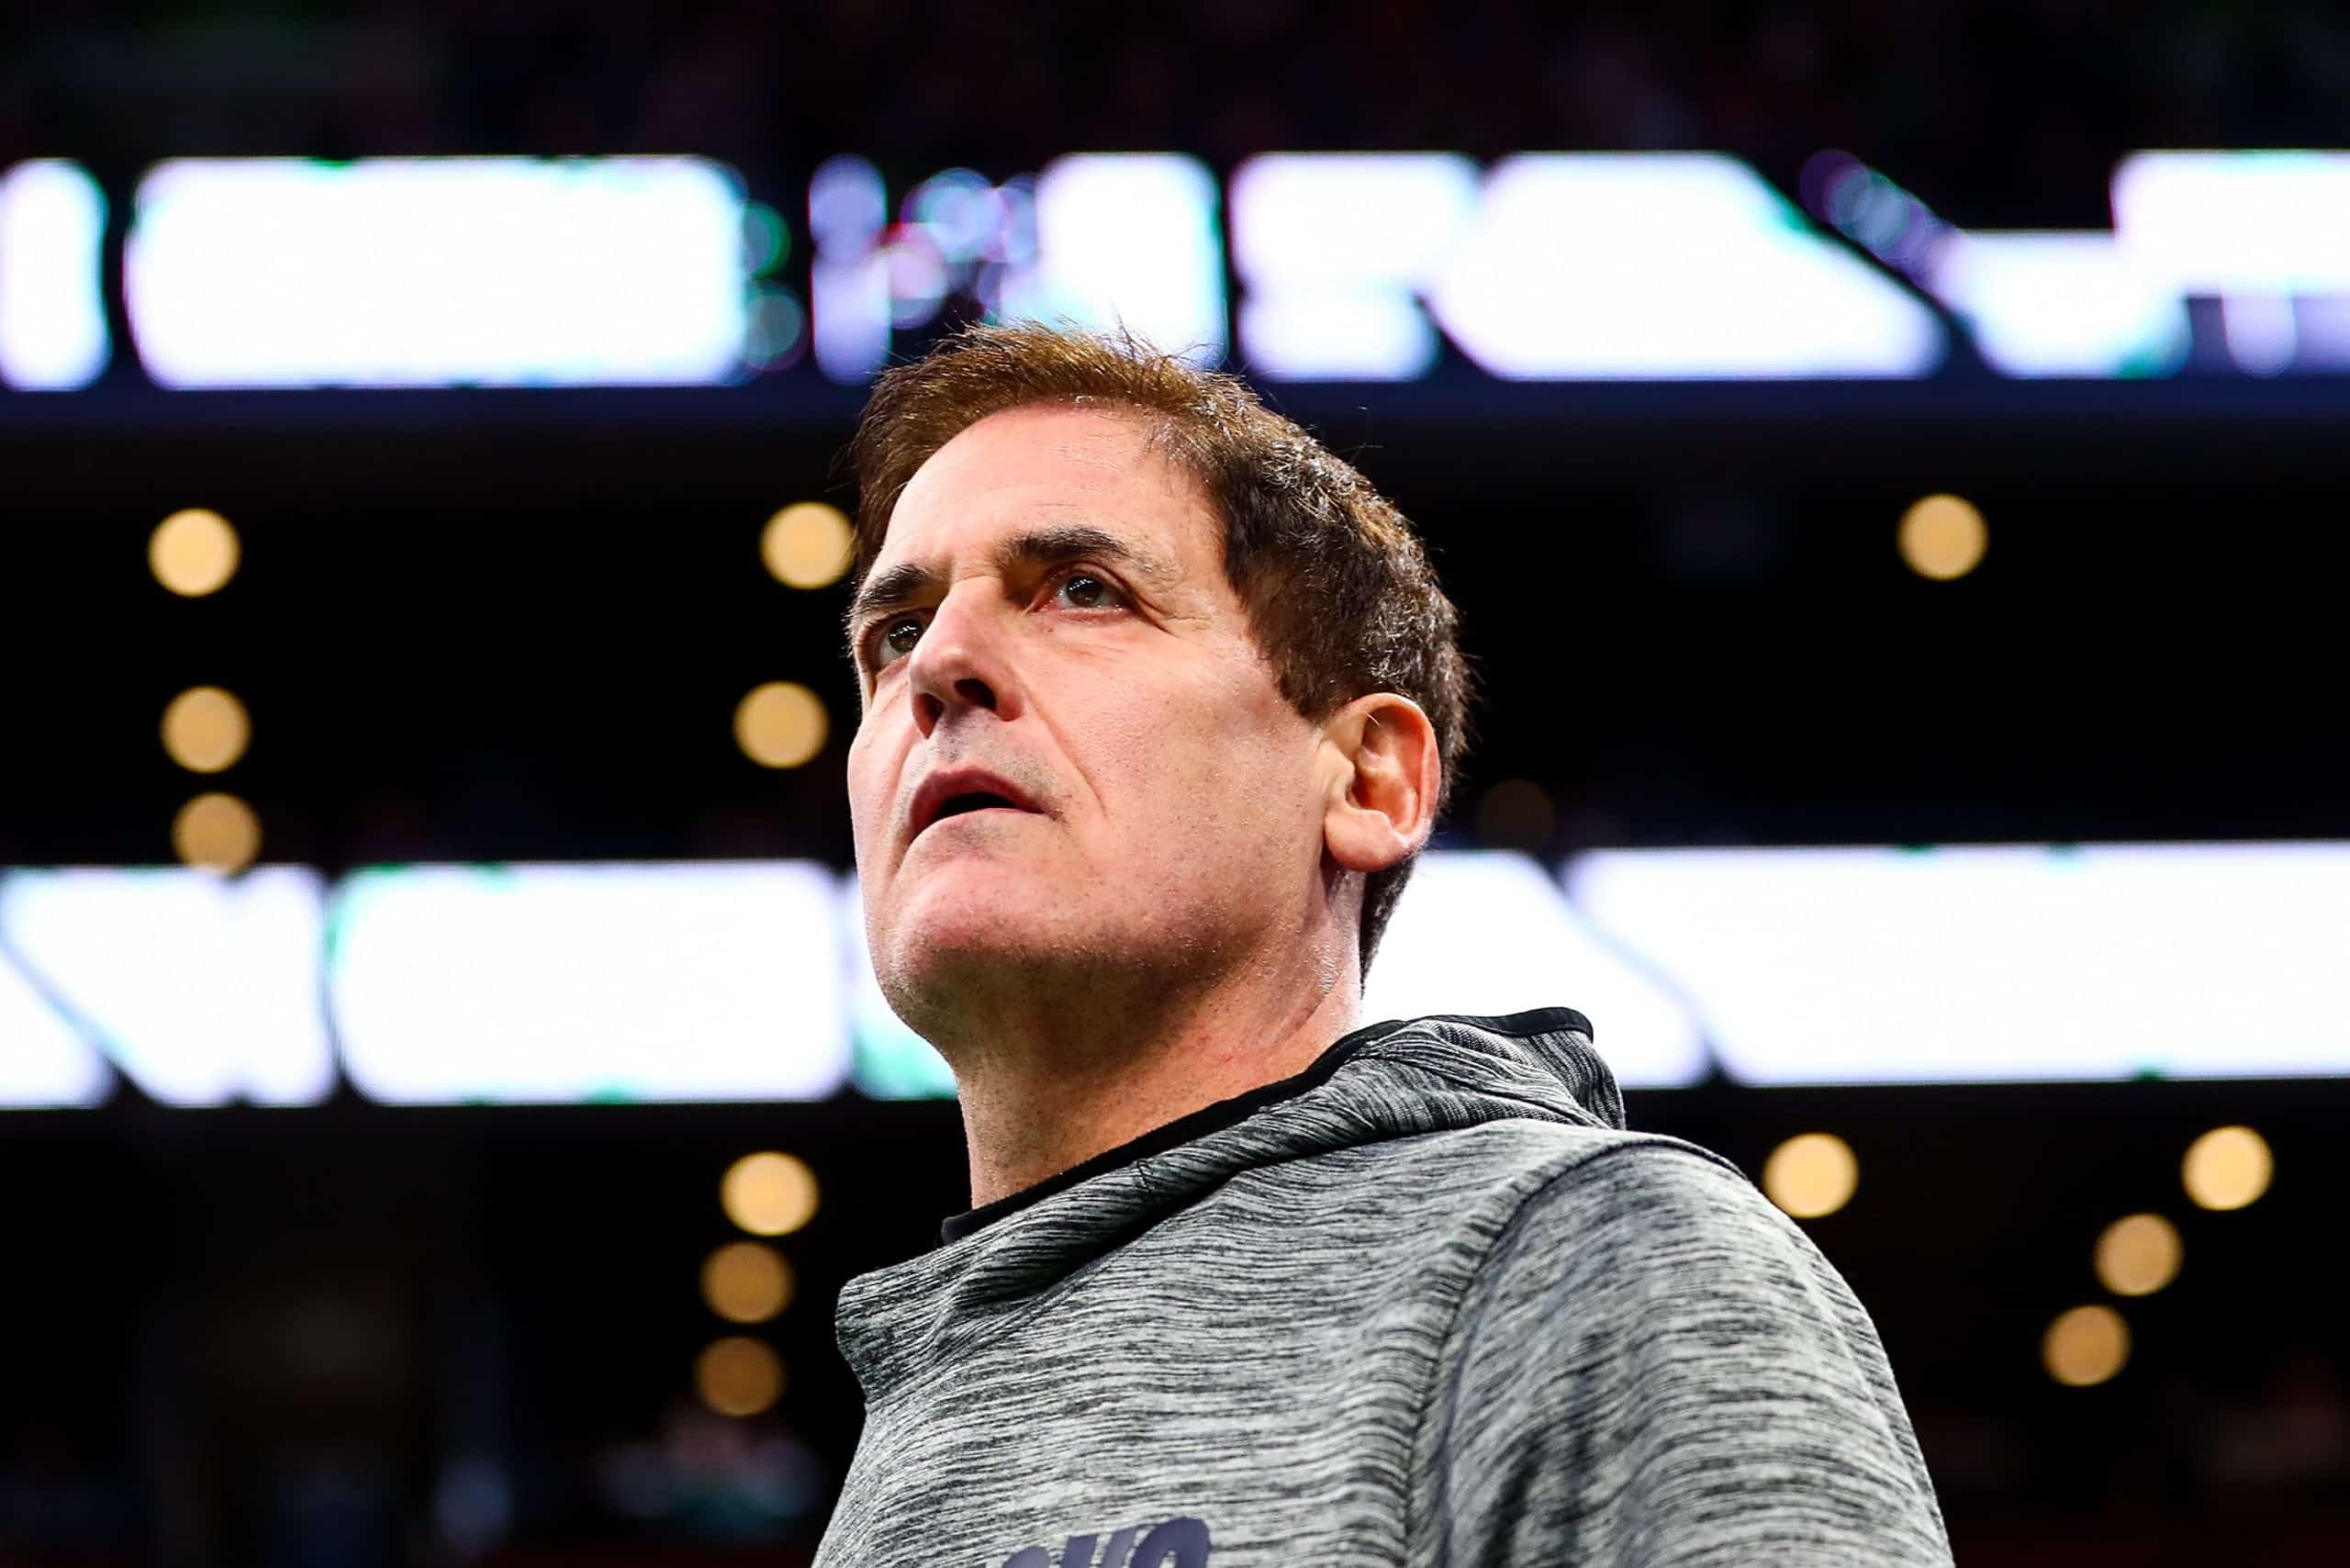 Mark Cuban's Instagram account 'NFT' banned over repeated policy violations